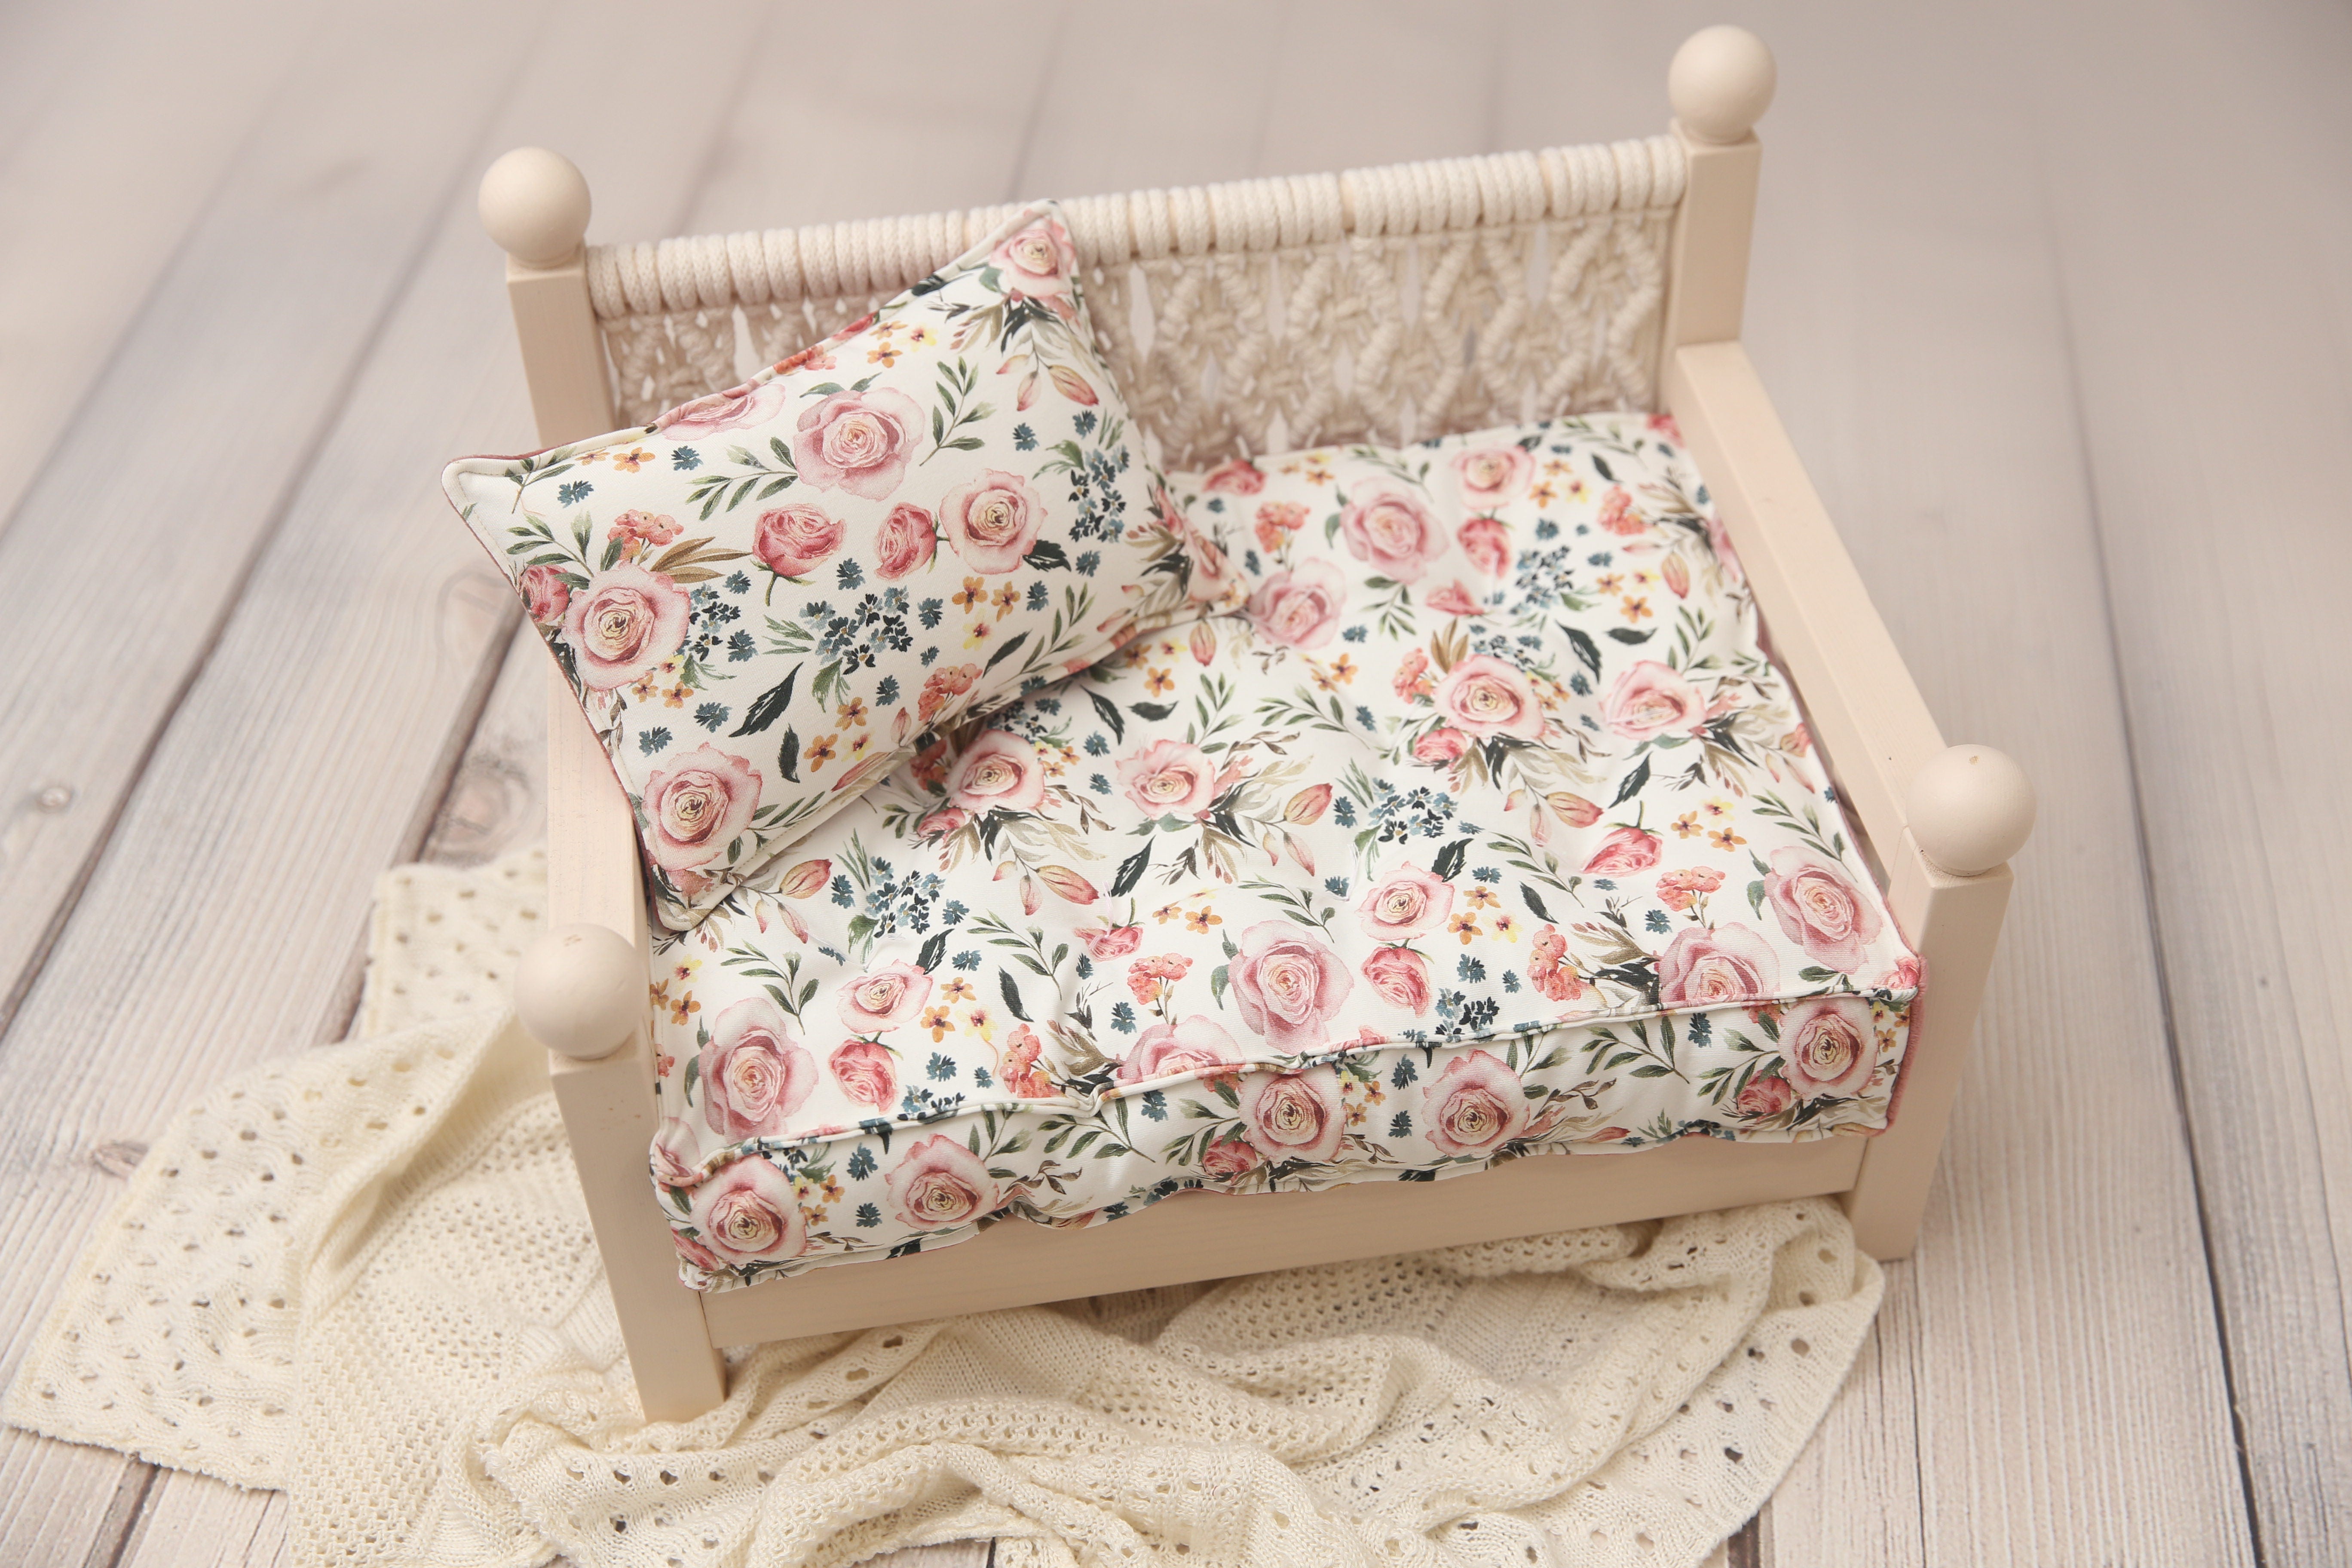 Roses REVERSIBLE 2 Color Mattress/Pillow Set- MADE TO ORDER